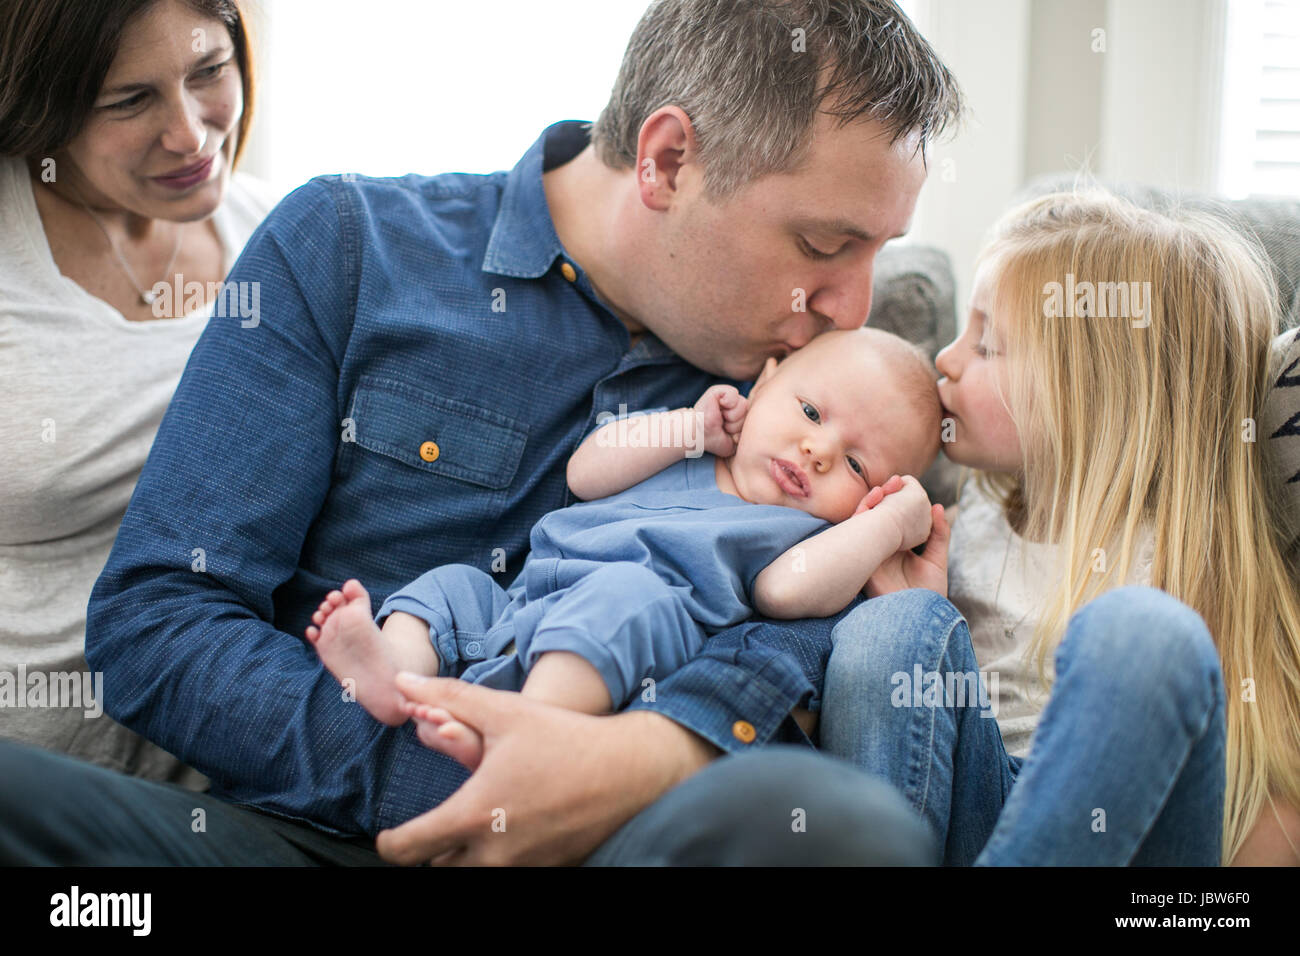 Family sitting on sofa, father and young girl kissing baby boy Stock Photo